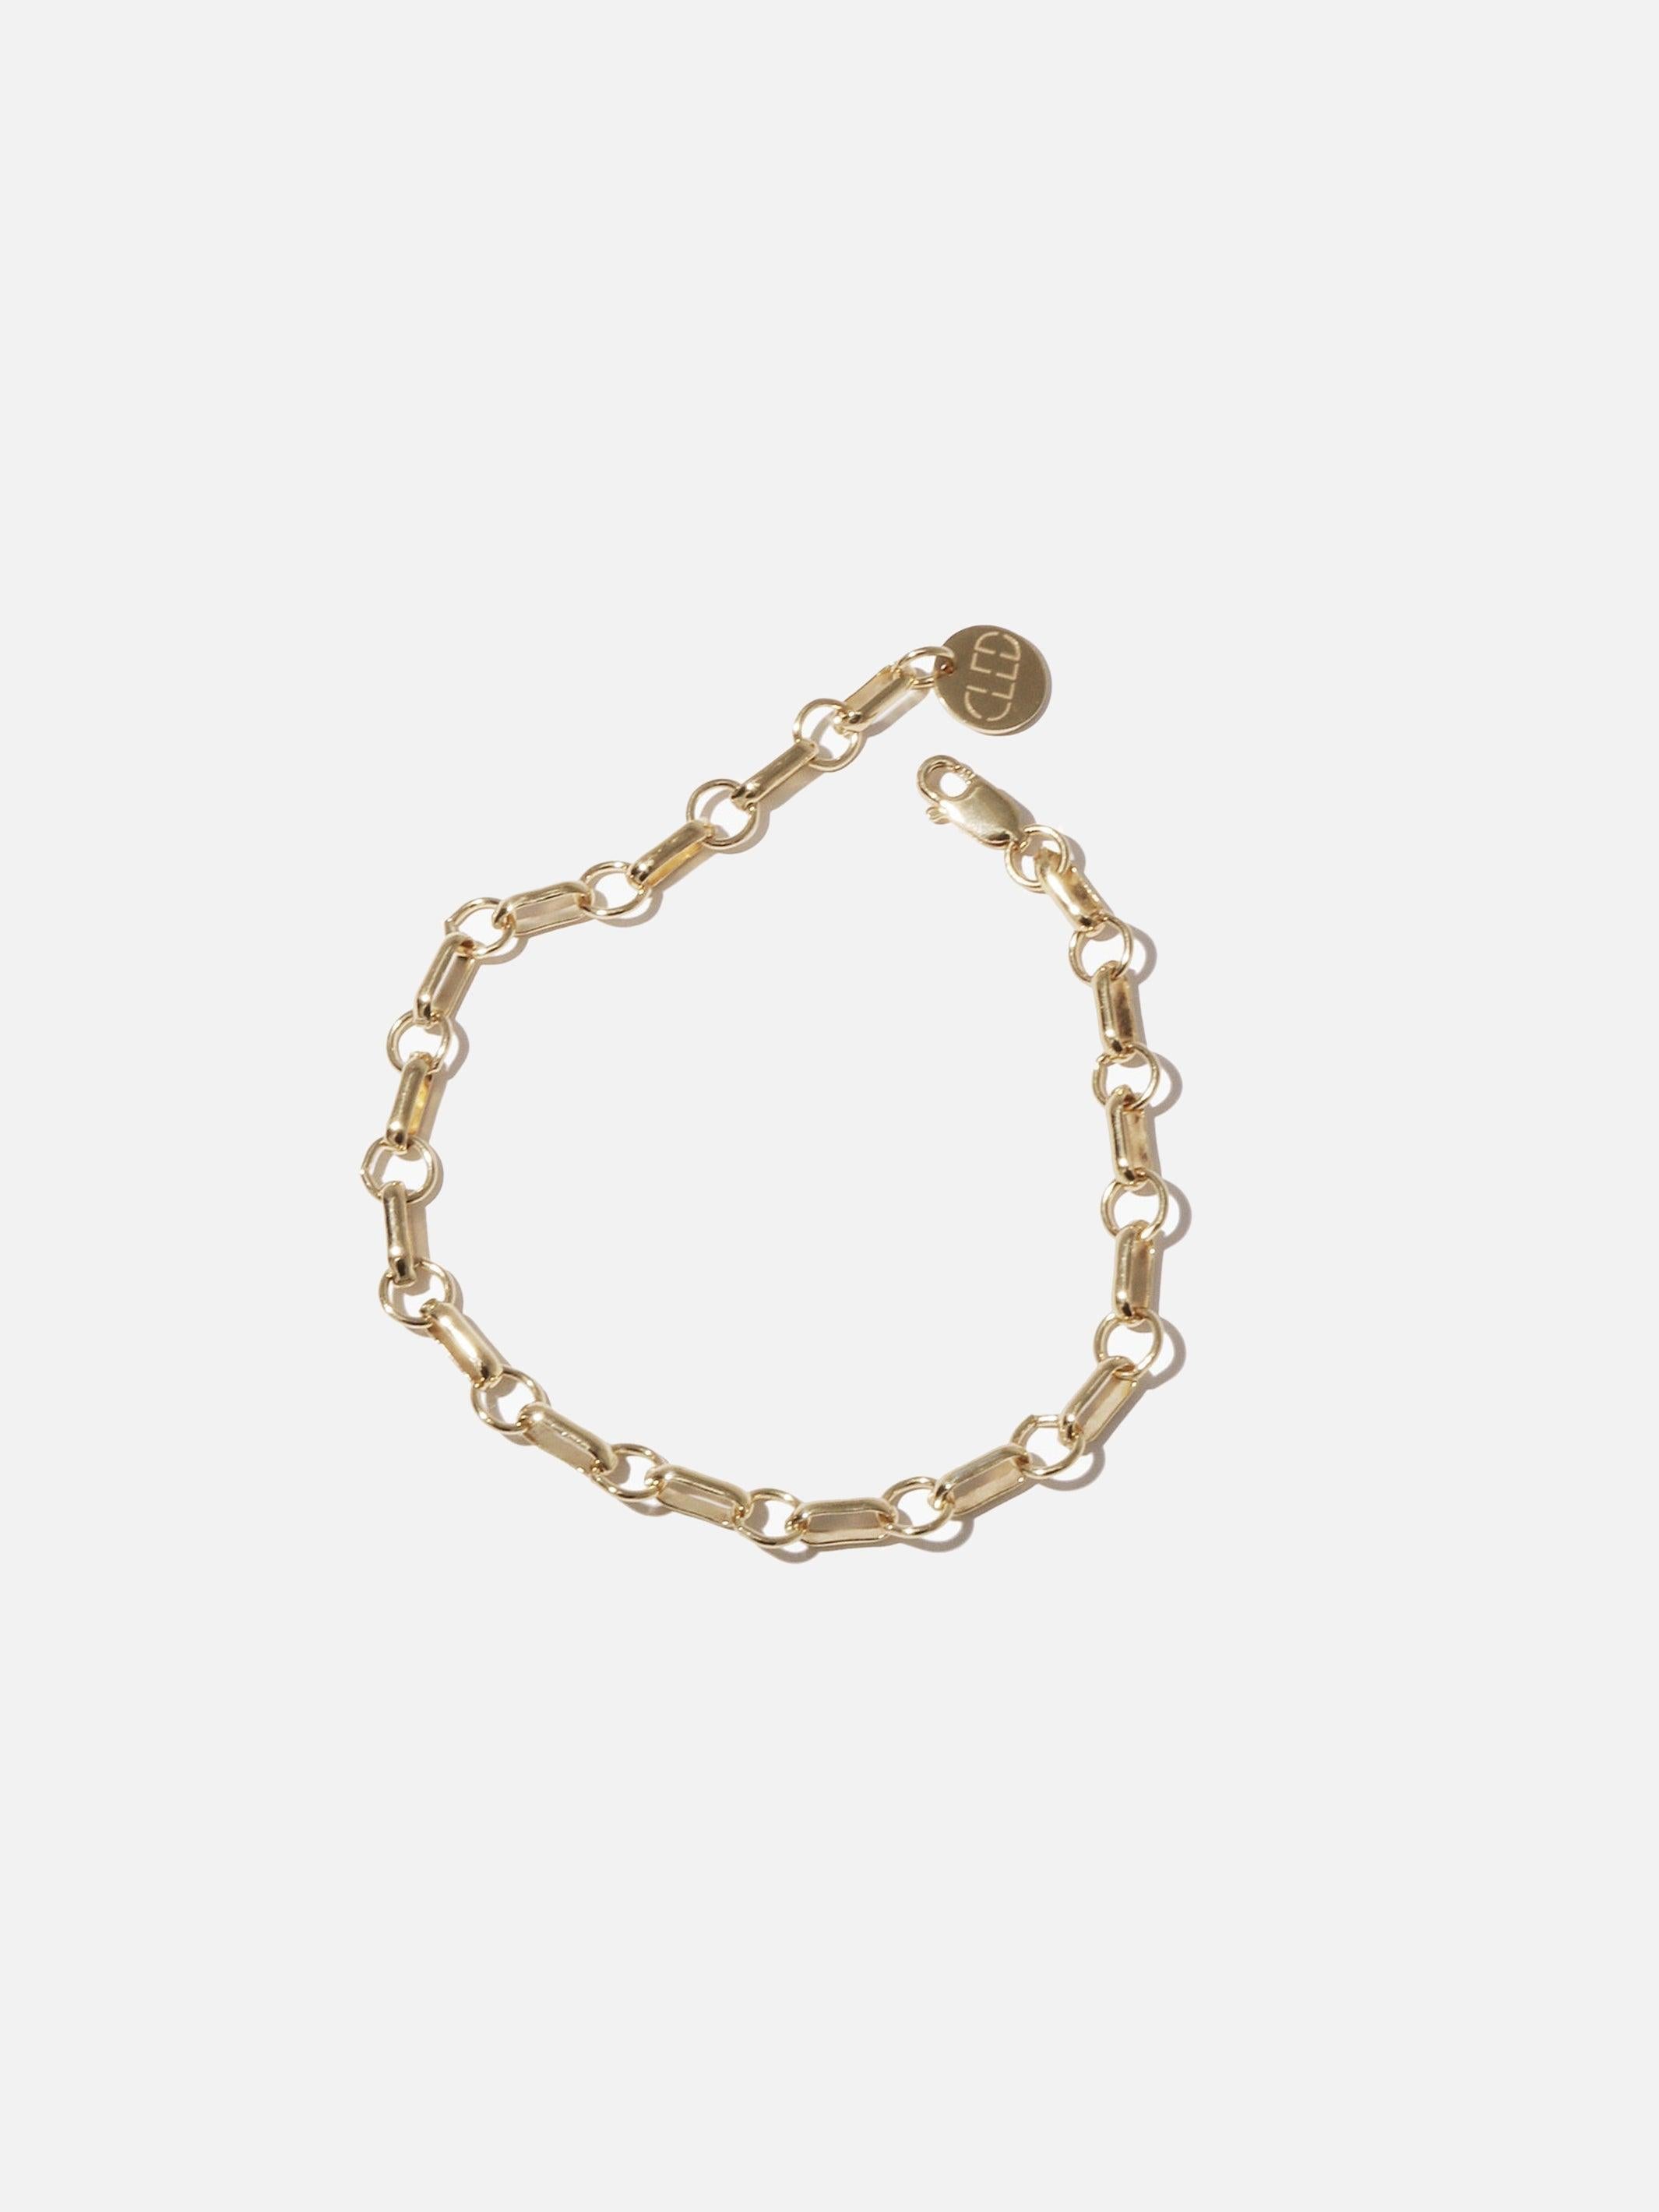 Icon Chain Bracelet - CLED - At Present